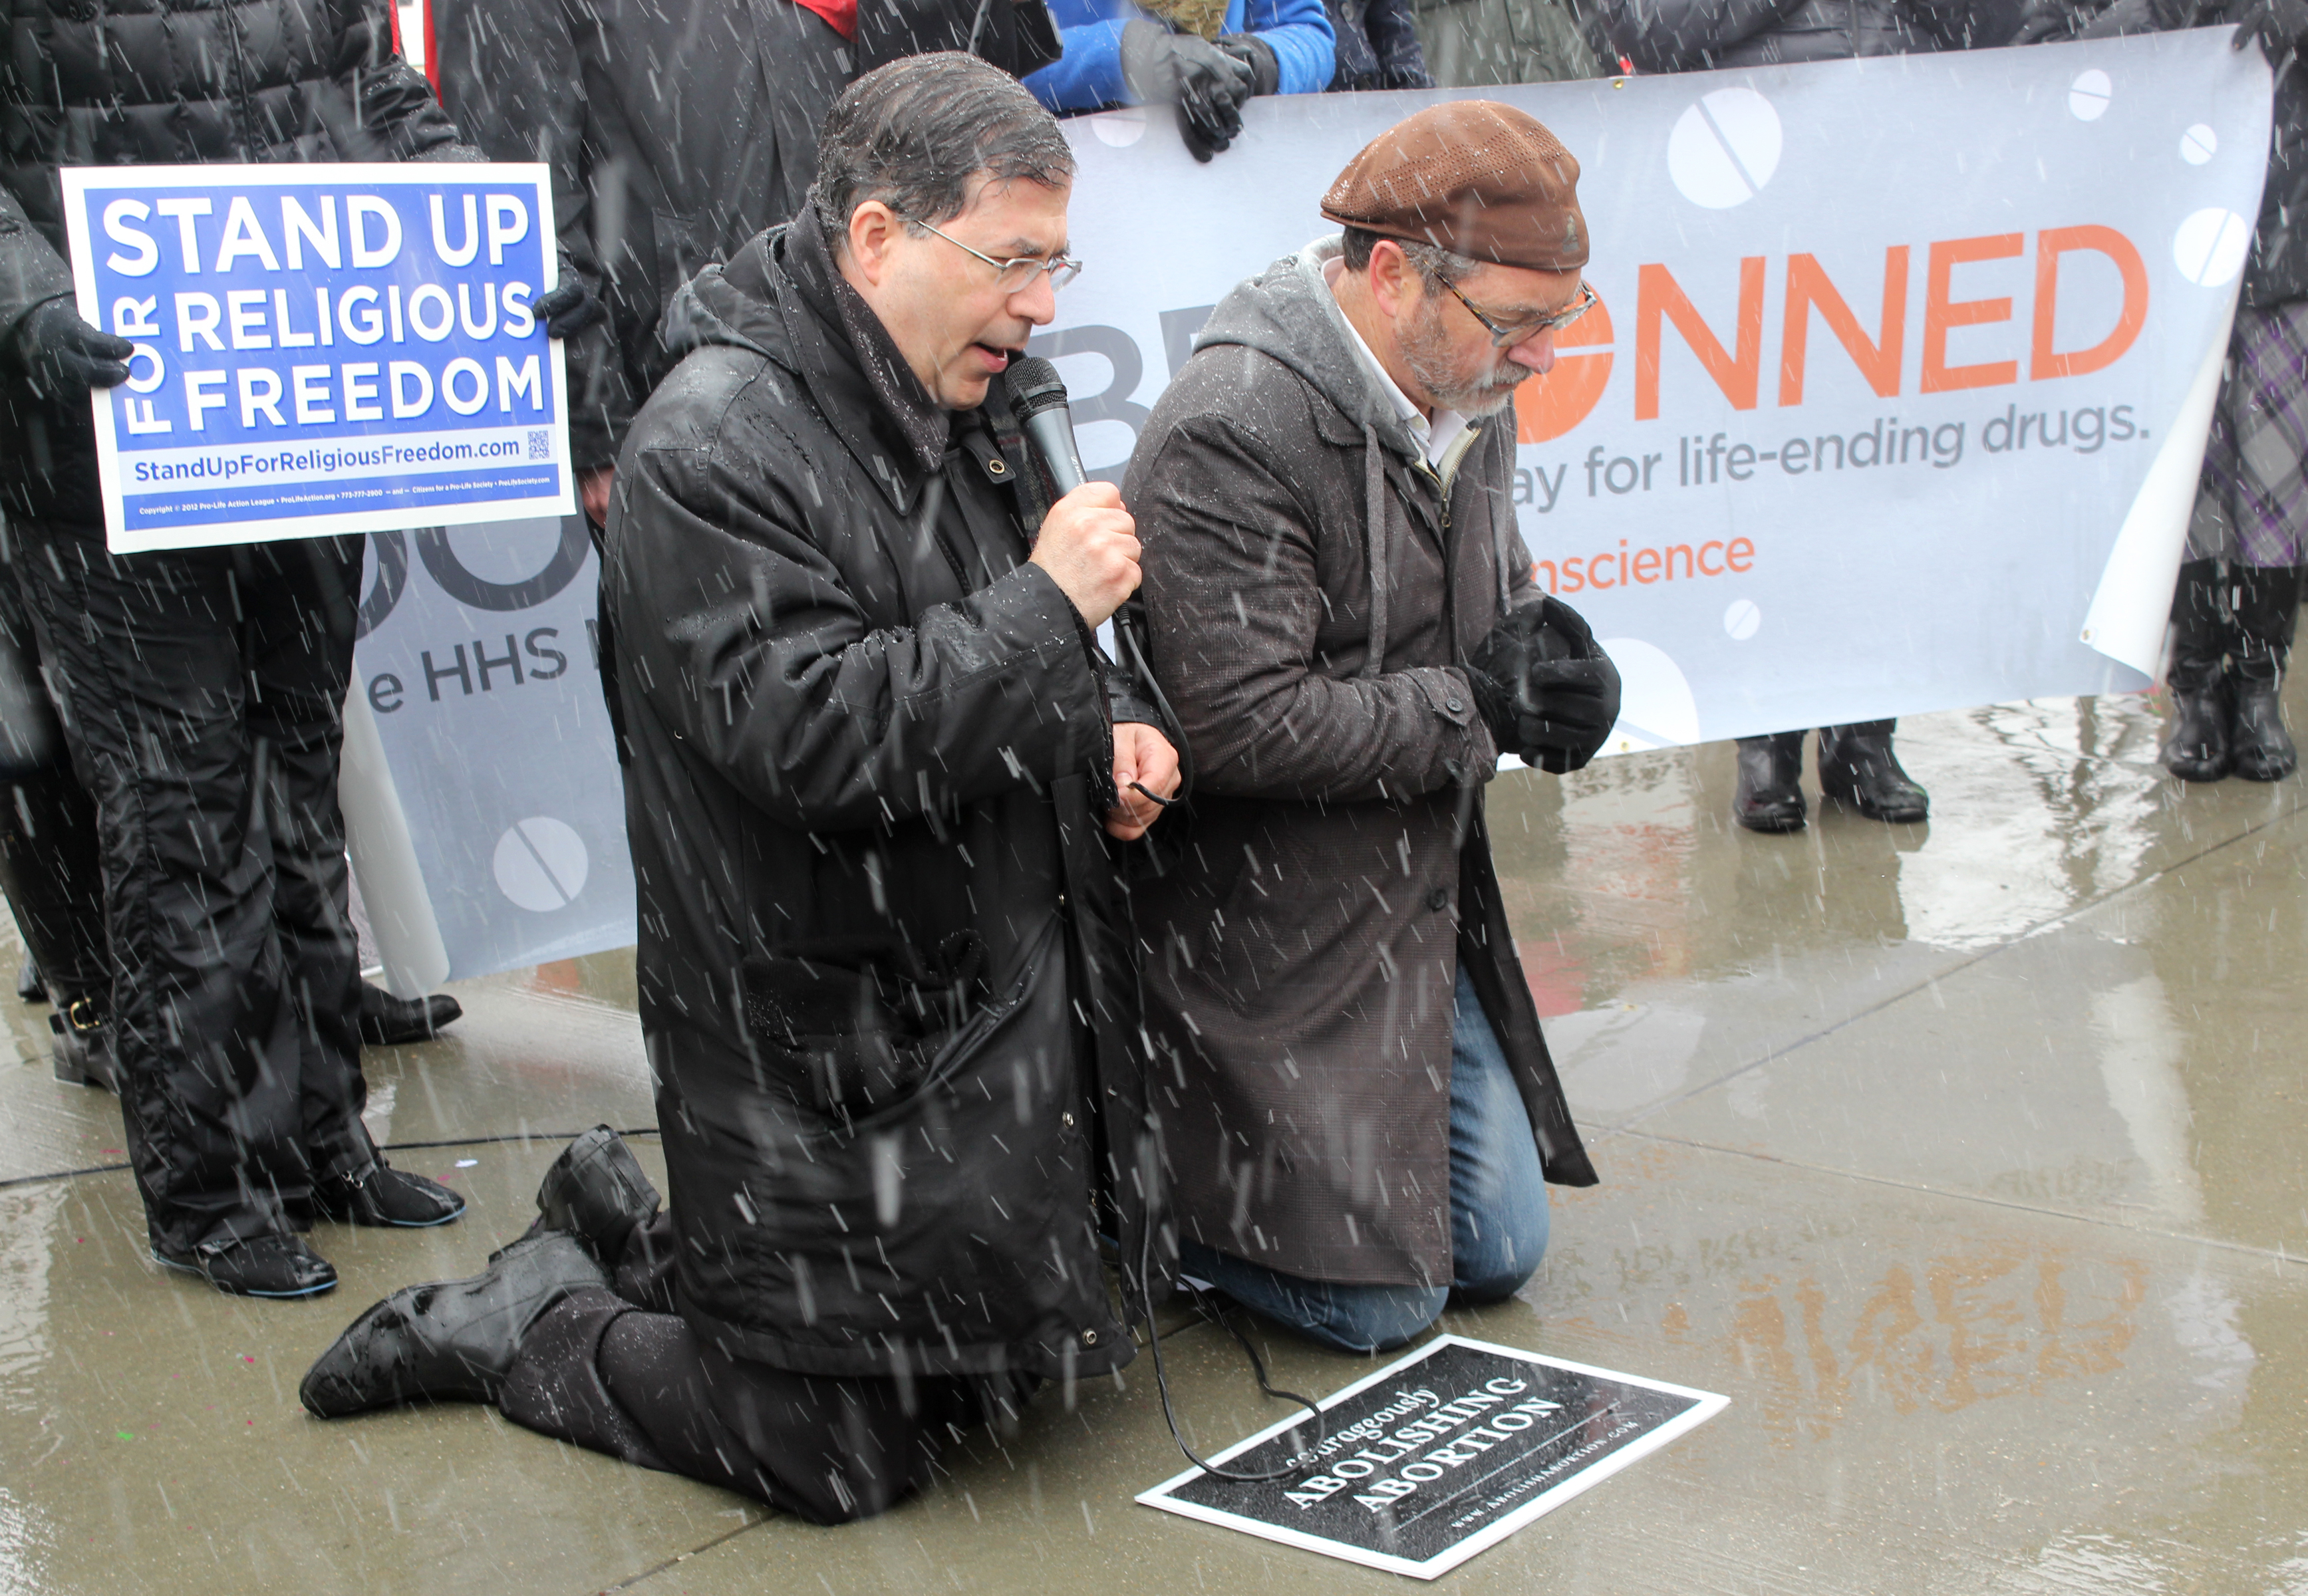 The Rev. Frank Pavone of Priests for Life, left, leads a prayer beside Rev. Patrick Mahoney, right, in front of the Supreme Court, as they support businesses challenging the contraception mandate of the Affordable Care Act on March 25, 2014. RNS photo by Adelle M. Banks